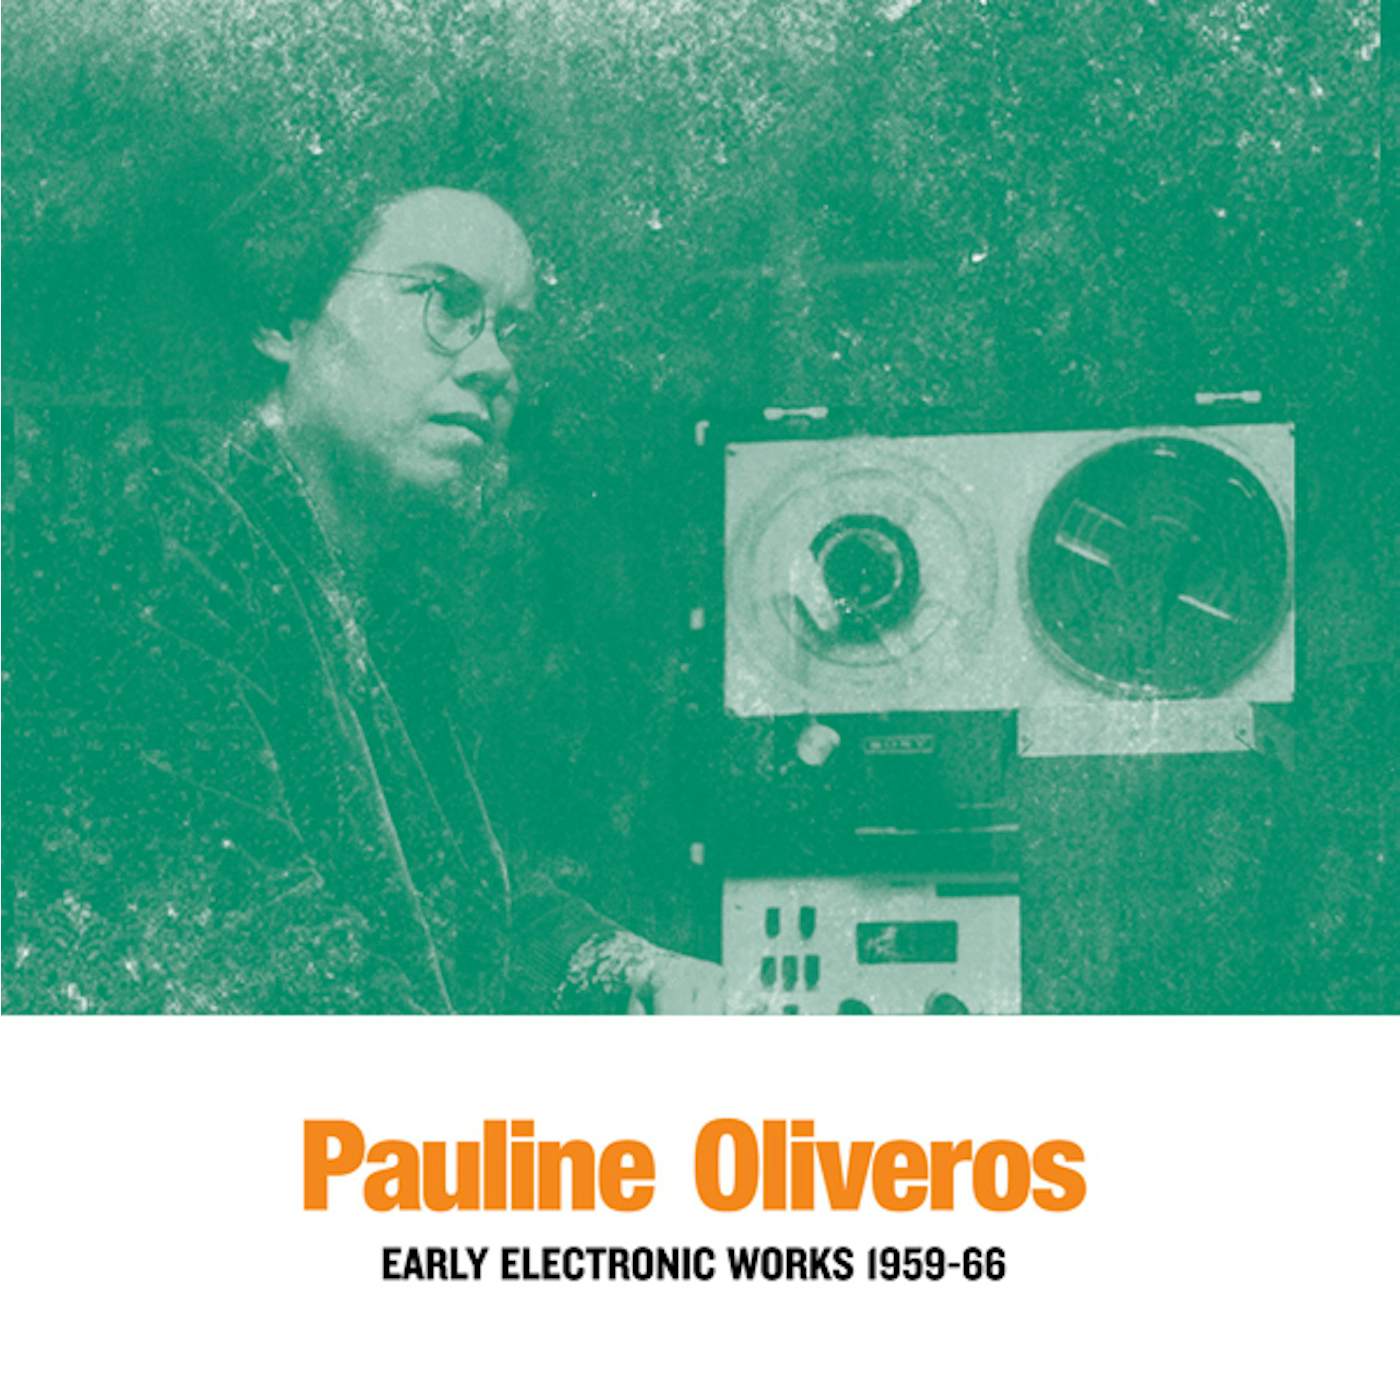 Pauline Oliveros EARLY ELECTRONIC WORKS 1959-66 Vinyl Record